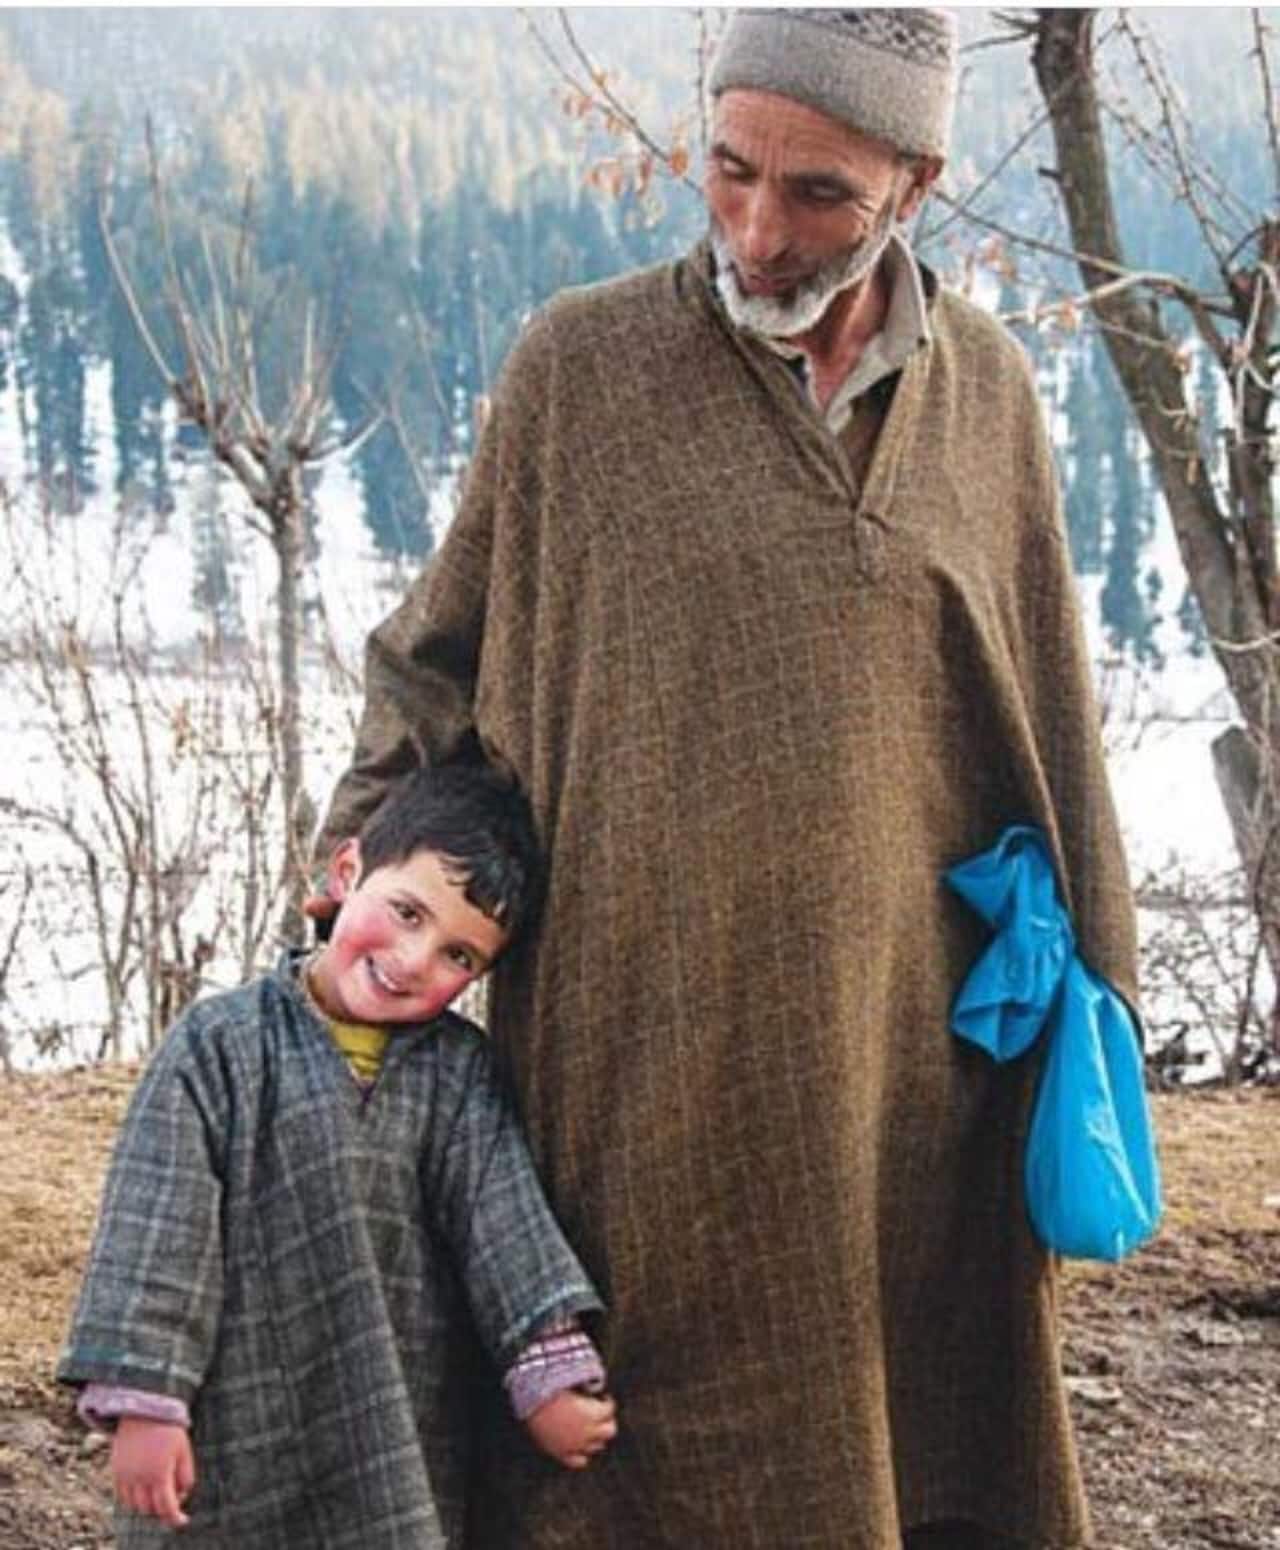 The pheran - a loose tunic that extends below the knees and is worn in the winter (locally known as Wande) - is unmistakably Kashmiri. Yet, it has become fashionable in other parts of India too. The appeal is obvious - the garment is warm without being cumbersome to wear, handle or clean. Typically embroidered using the tilla or arikaam technique, it is often also eye-catching. The long robe of the pheran is also spacious enough to cradle a toddler, with his or her head sticking out from the opening (Naal). (Photo: Dardic warrior via Wikimedia Commons 4.0)